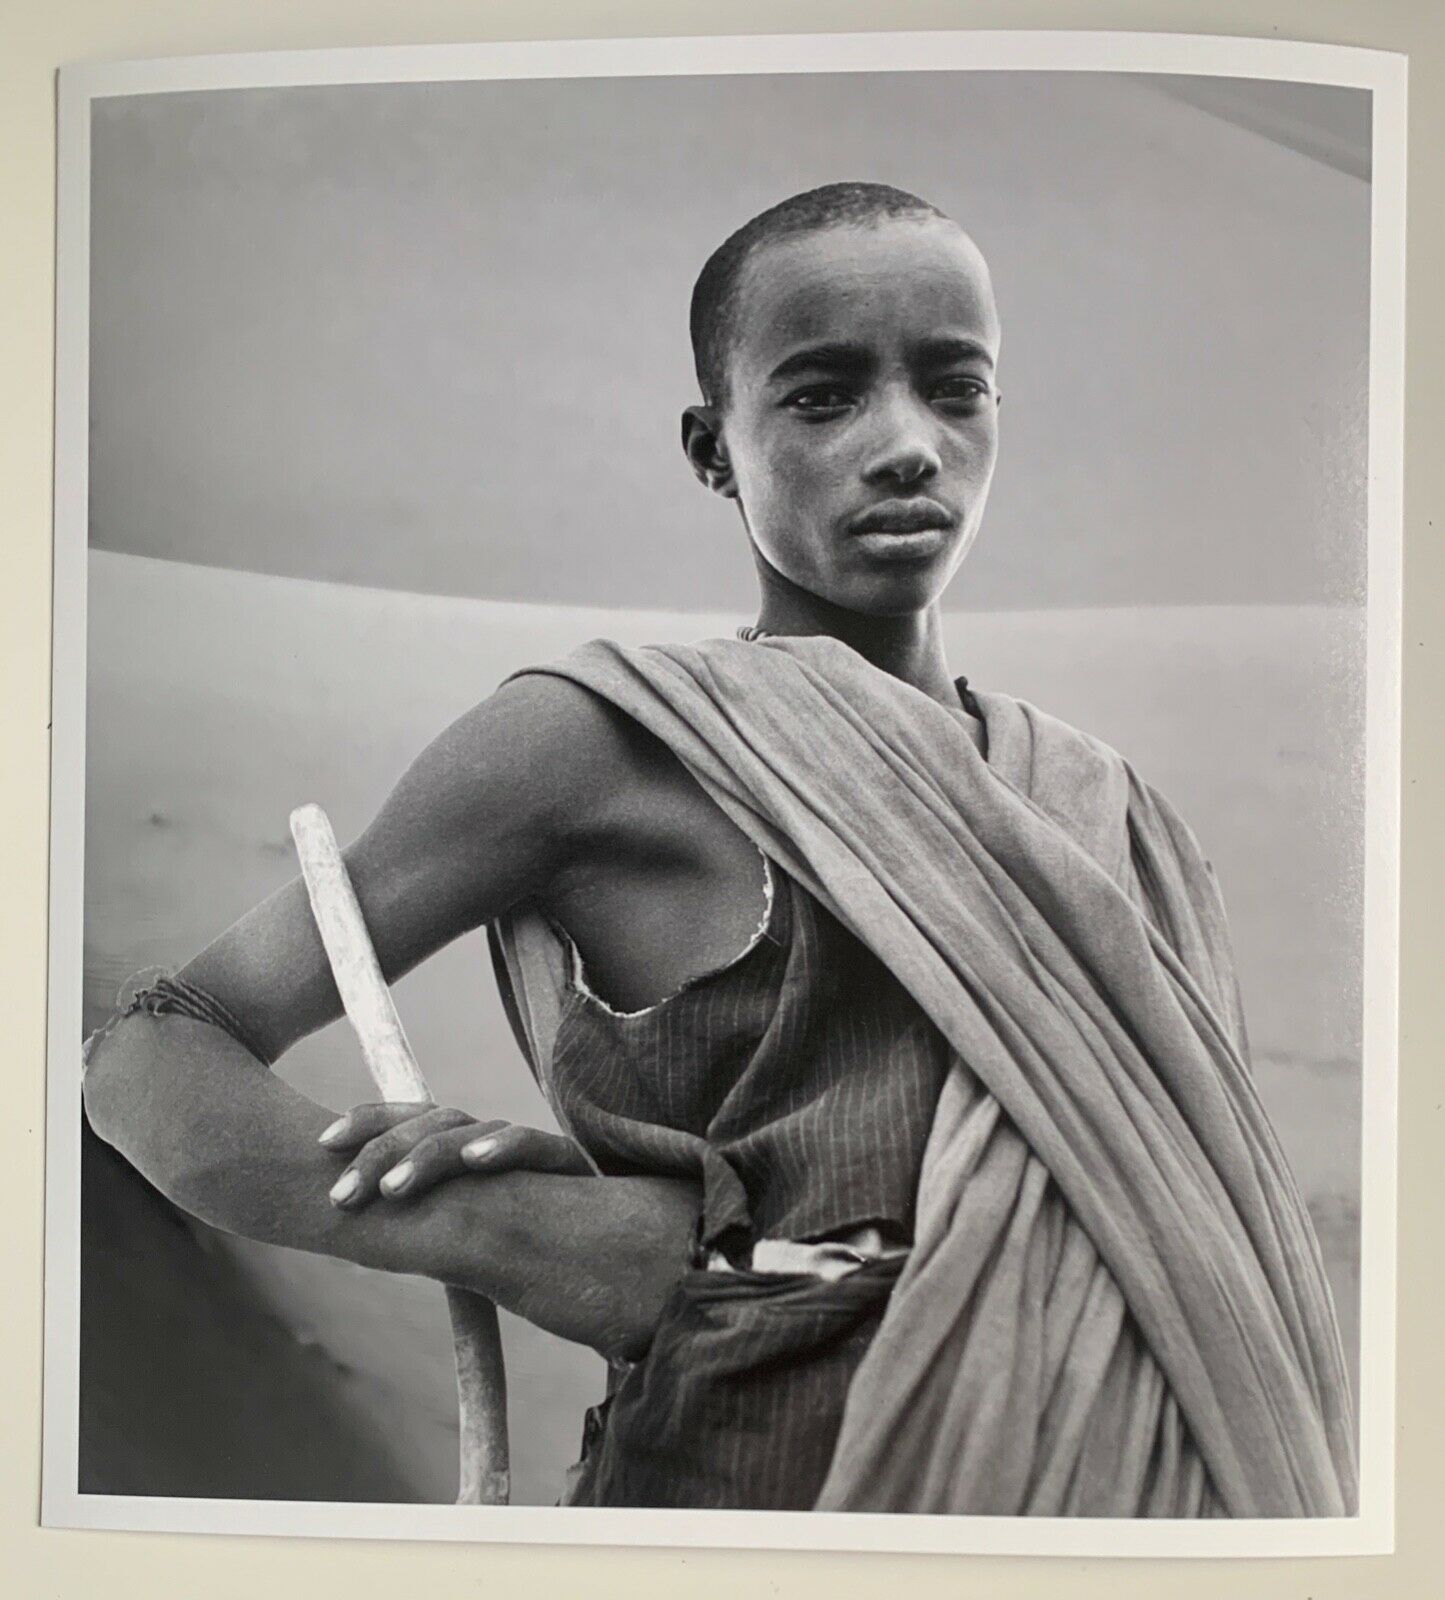 The Young Ethiopian